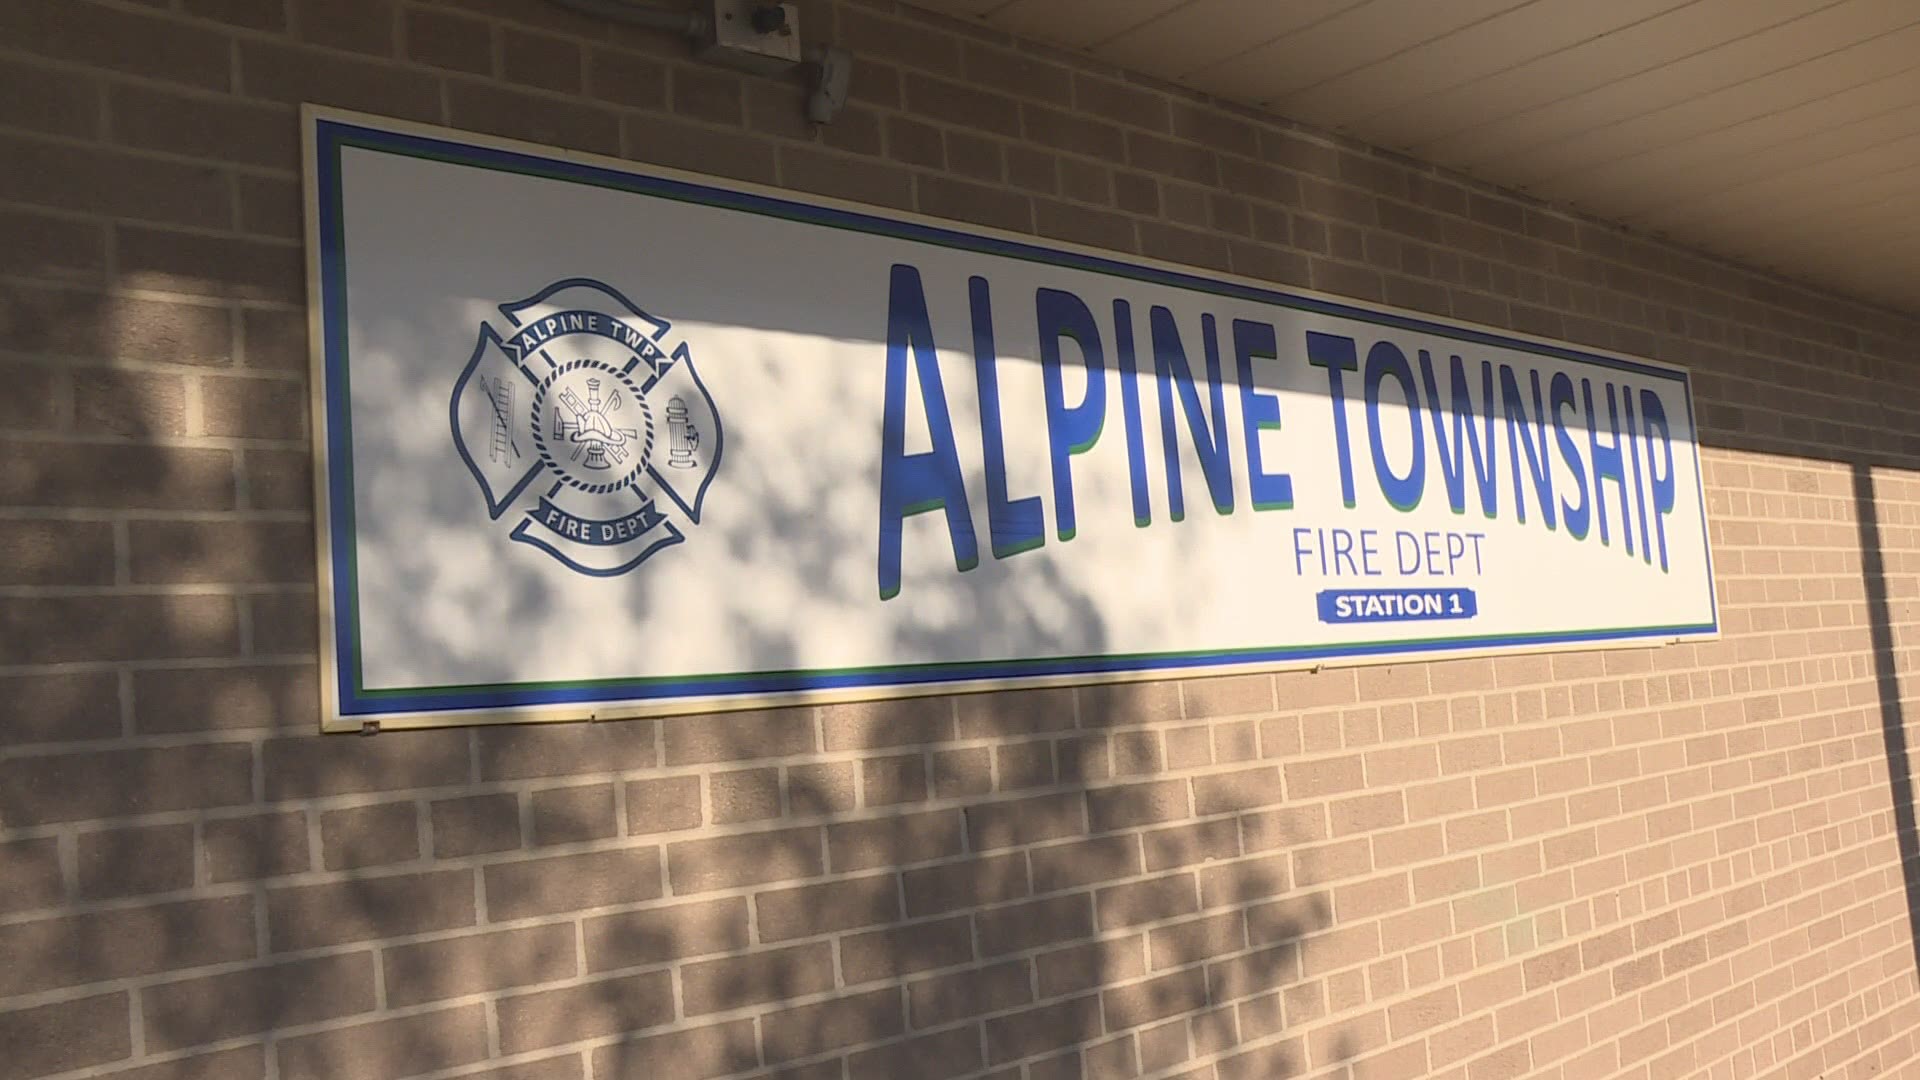 Voters in Alpine Township are being asked to approve a 20-year millage to pay for a new fire station, additional fire department staff and equipment.